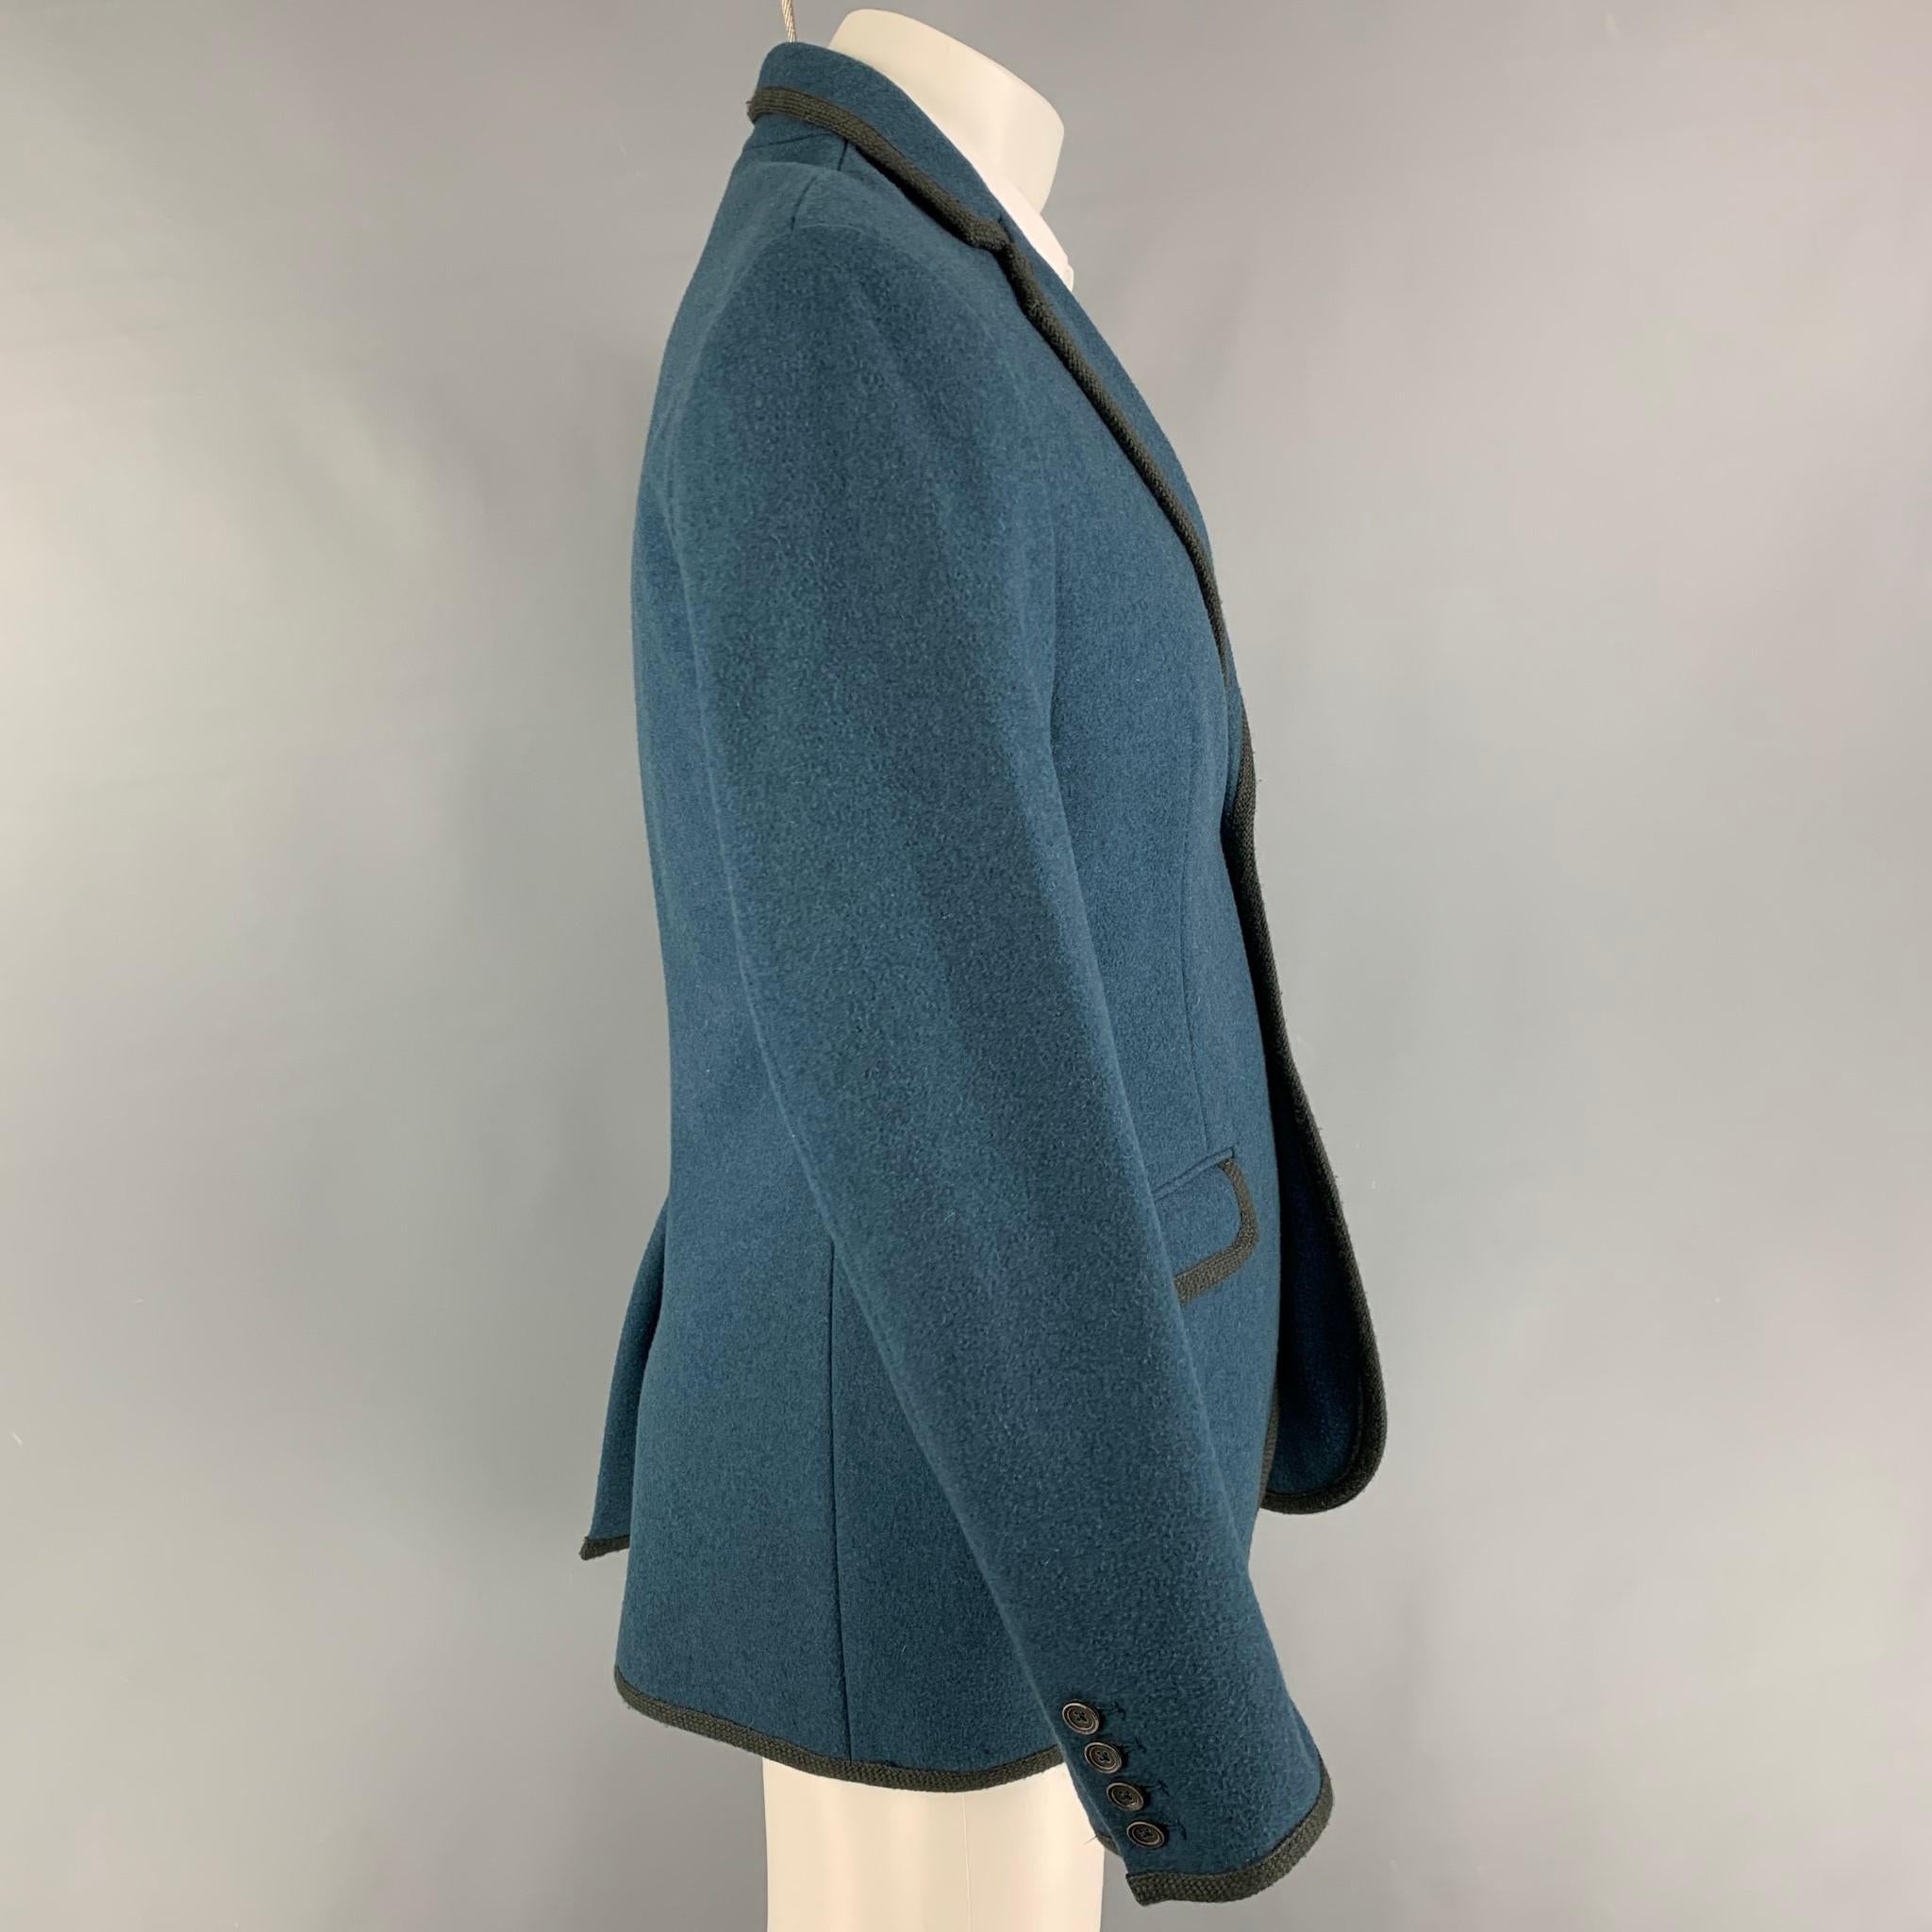 MARC by MARC JACOBS sport coat comes in a teal & charcoal wool with a full liner featuring a notch lapel, flap pockets, single back vent, and a double button closure. 

Very Good Pre-Owned Condition.
Marked: M

Measurements:

Shoulder: 18.5